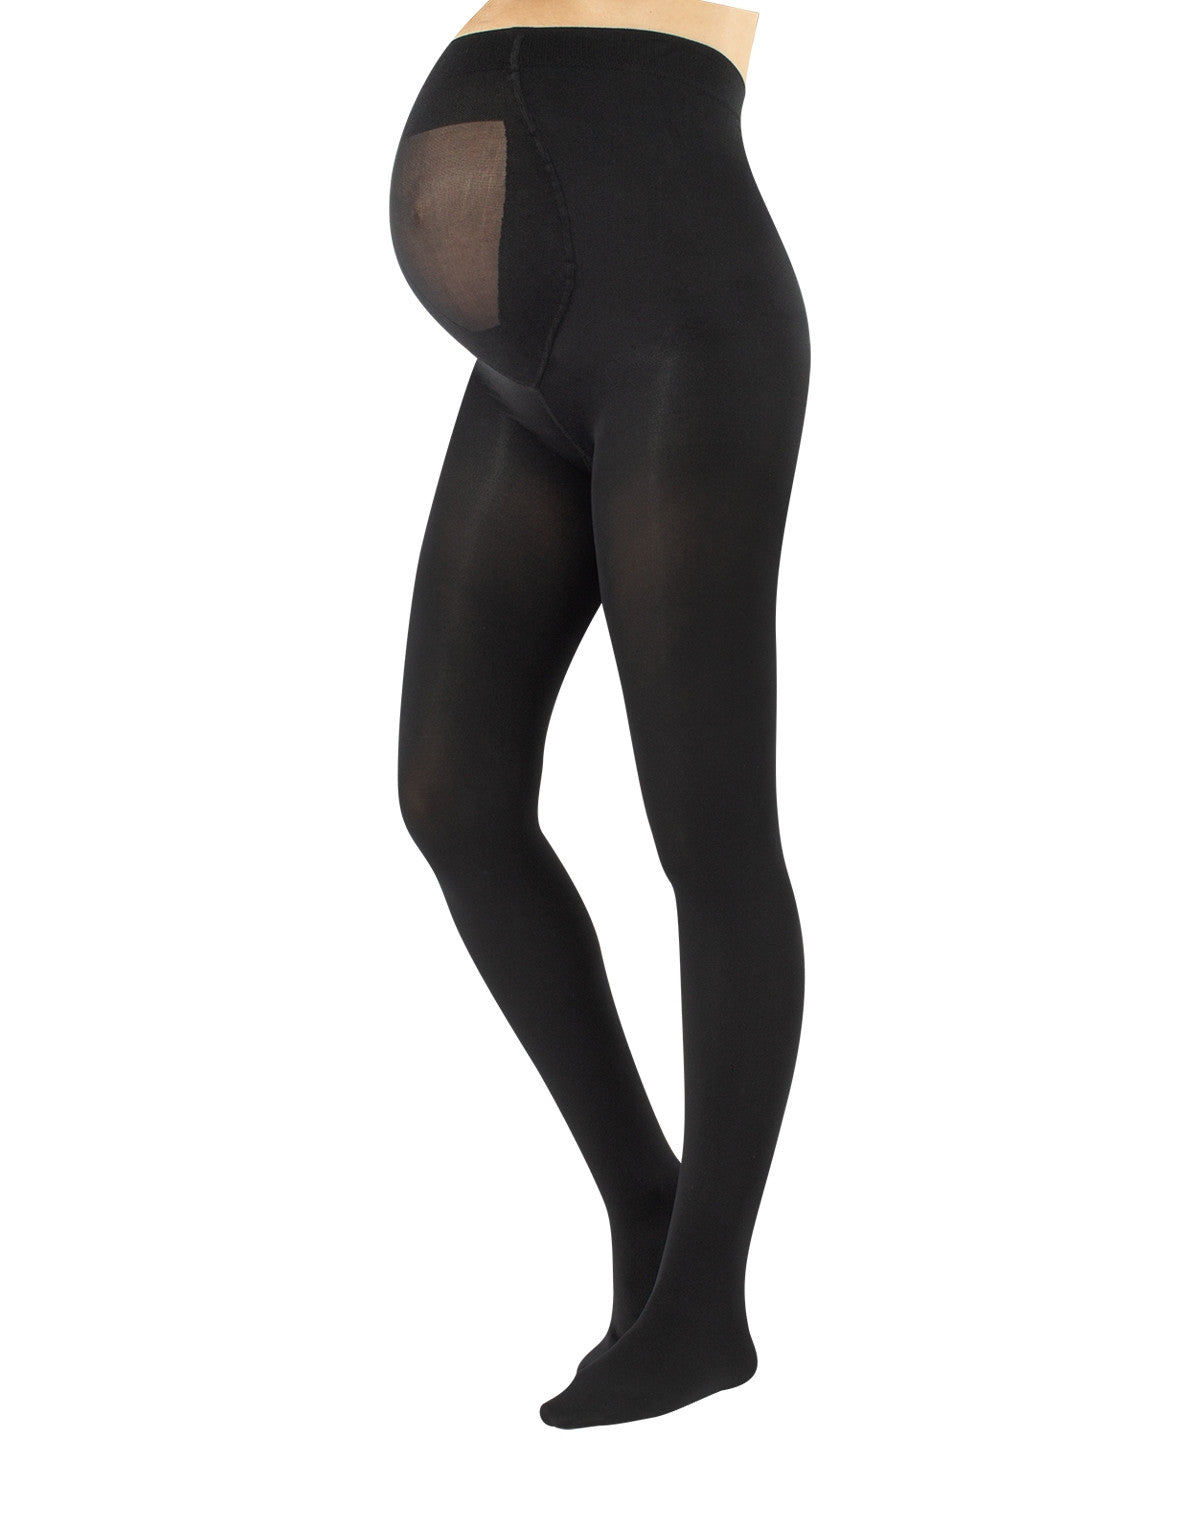 Calzitaly 100 Den Maternity Tights - Black ultra opaque pregnancy tights with an extra panel and flat seam.